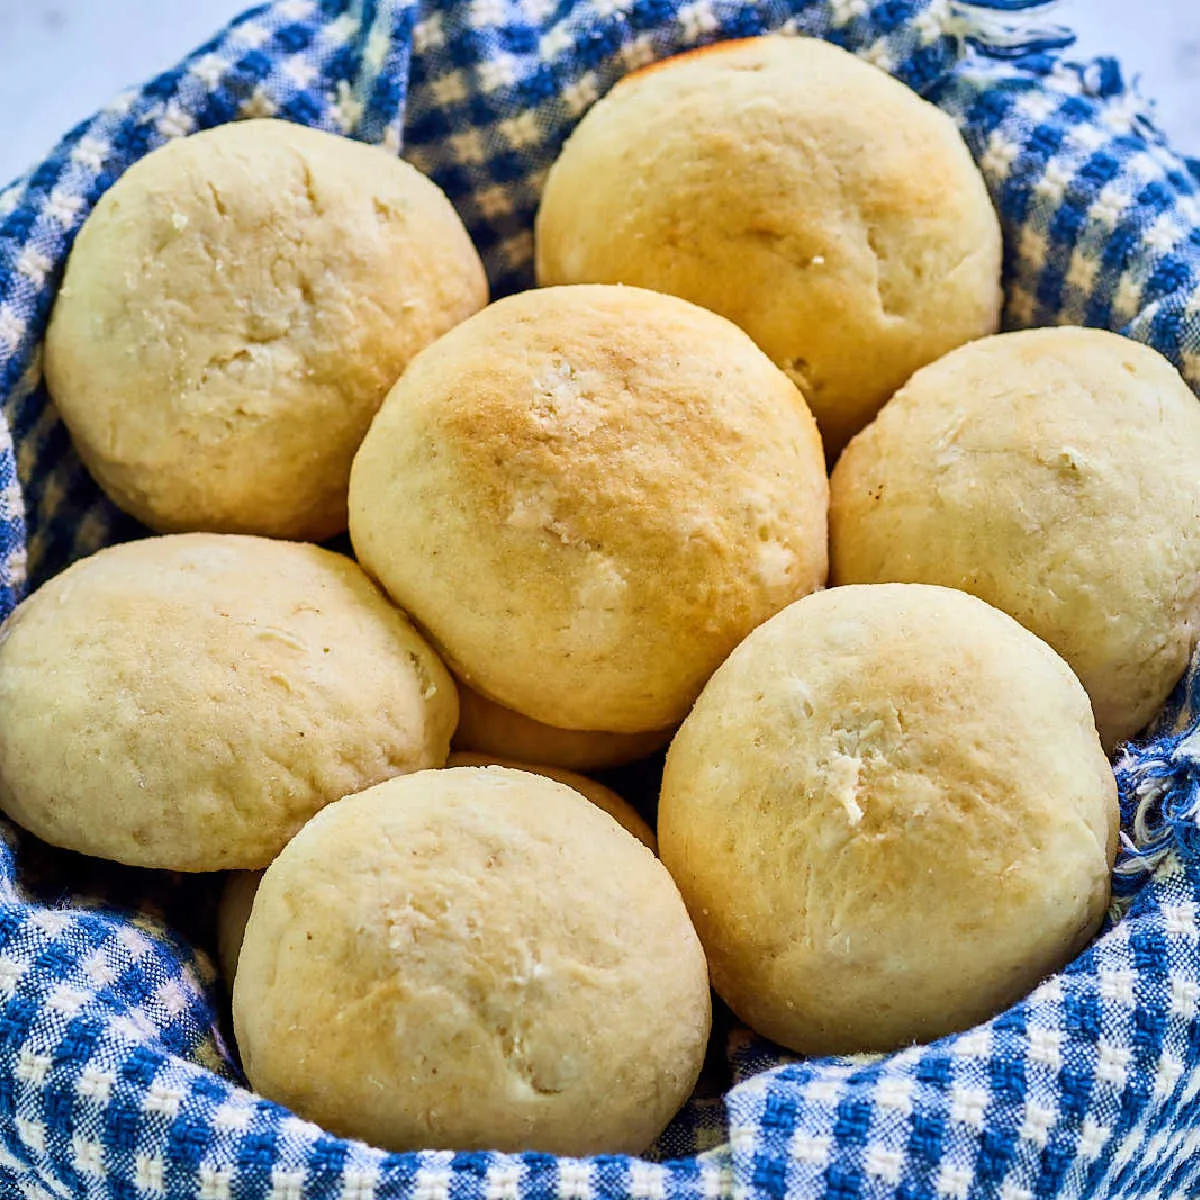 Close up of basket of homemade potato rolls showing their round shape and buttery golden brown tops.